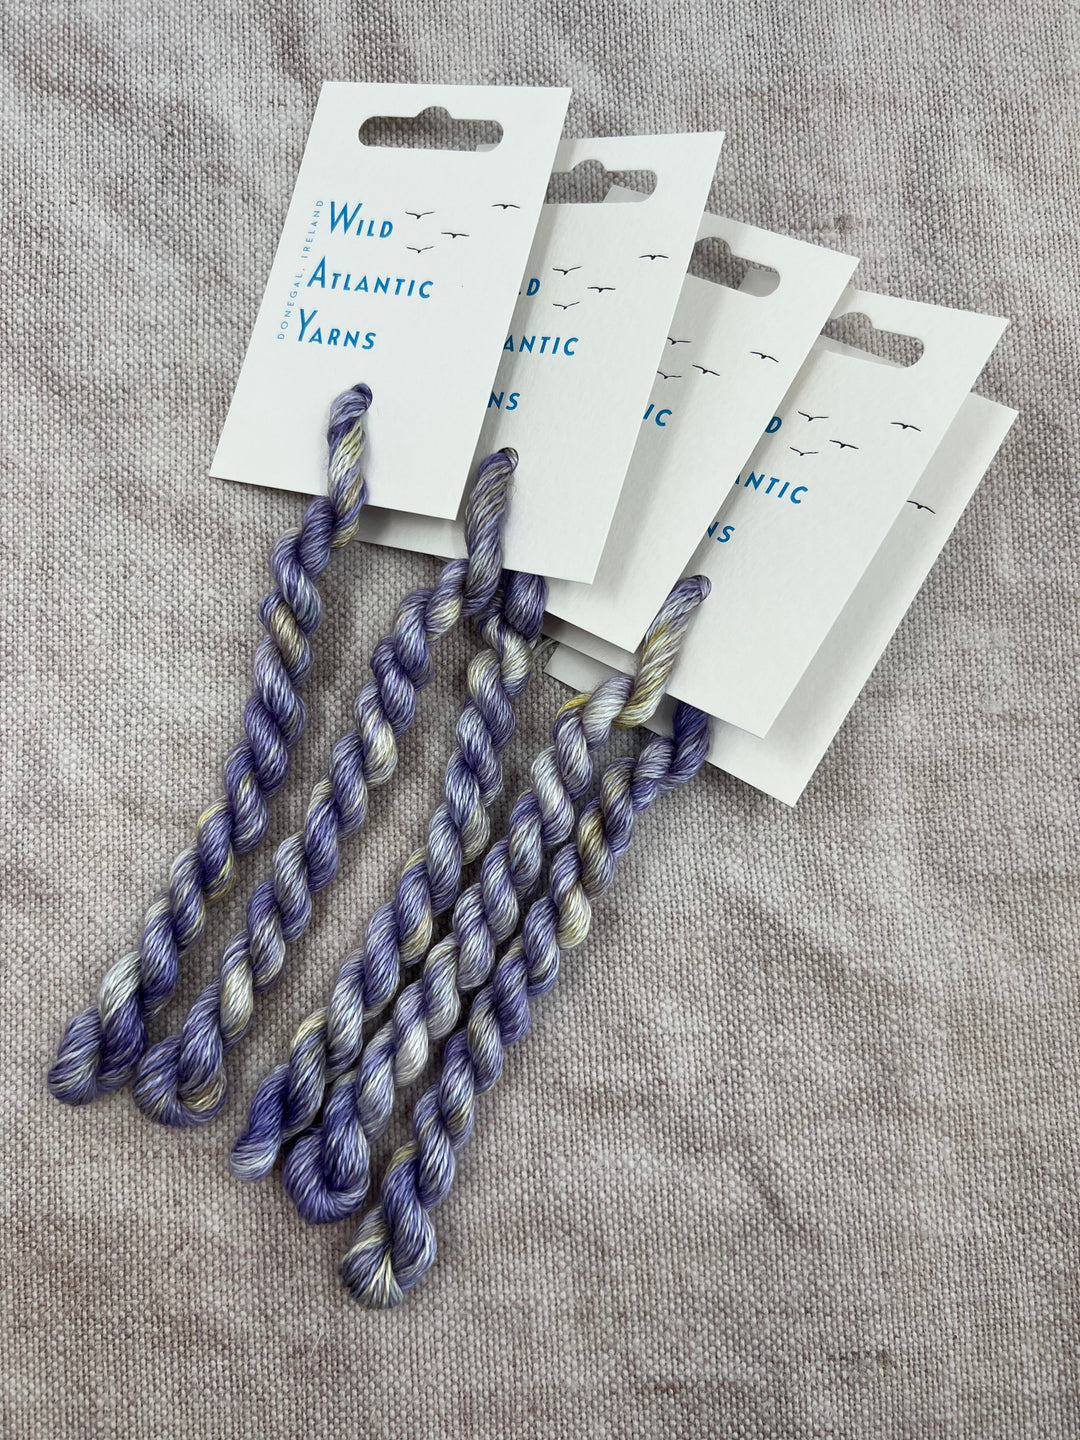 EMBROIDERY THREAD: Forget - me - not - EMBROIDERY THREAD - Wild Atlantic Yarns